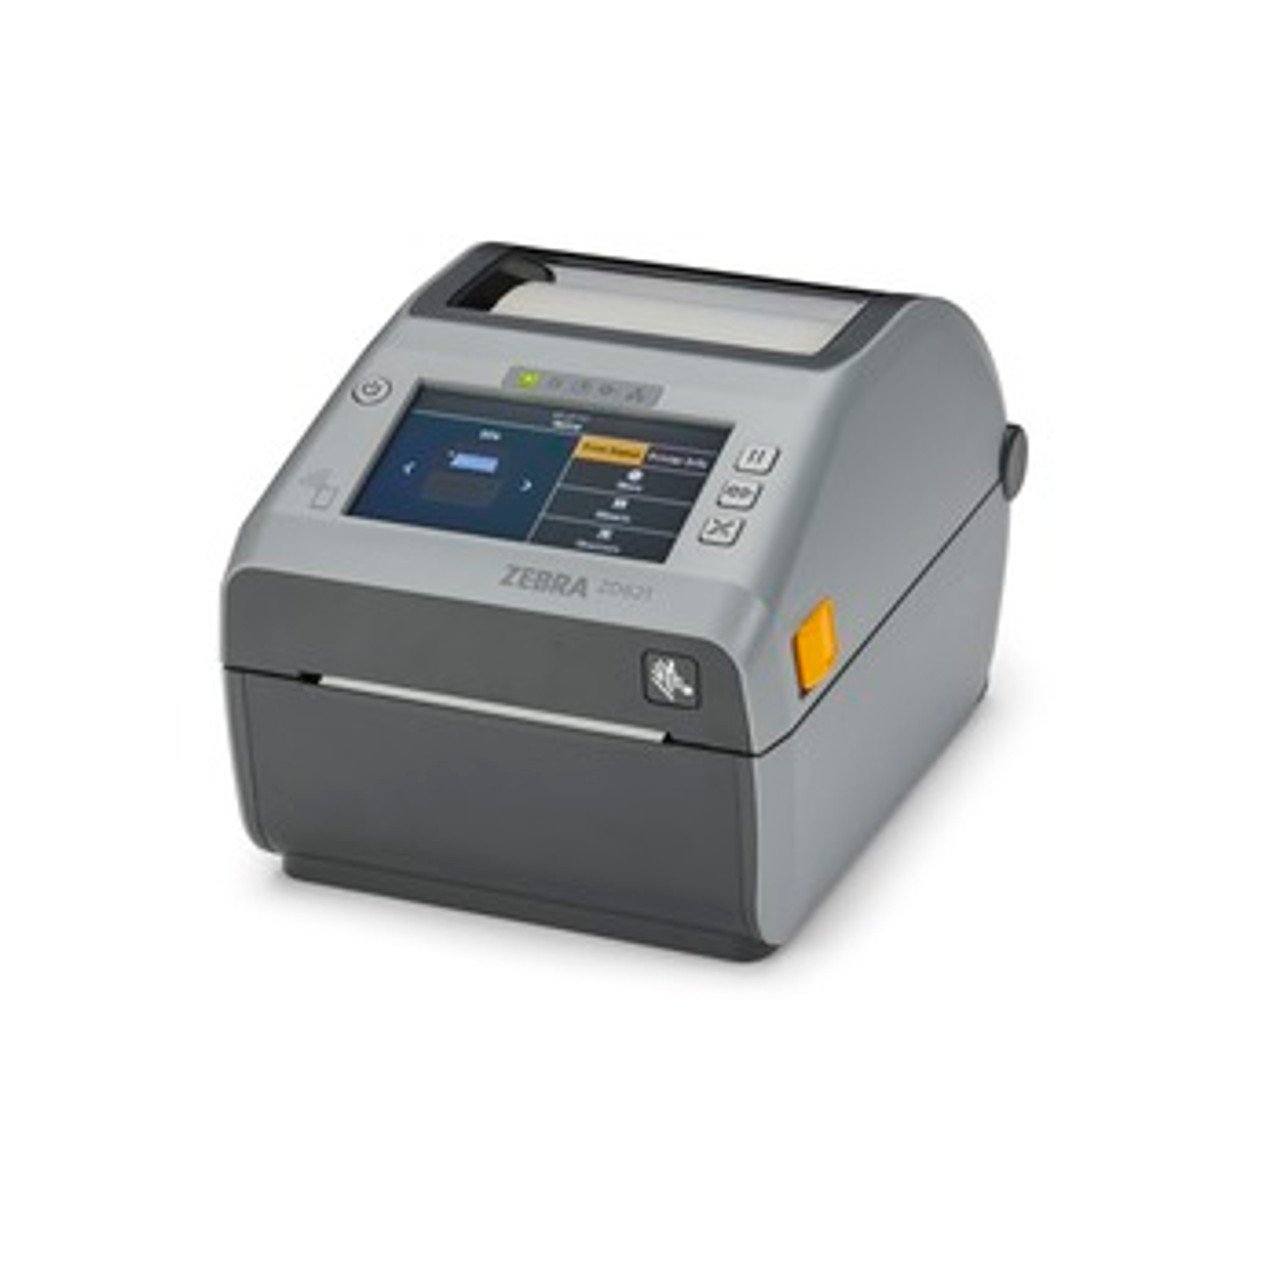 ZEBRA ZT411 Thermal Transfer Industrial Printer 203 dpi Print Width in Features Serial, USB, Ethernet, and Bluetooth Connecting Options Peeler ZT411 - 4